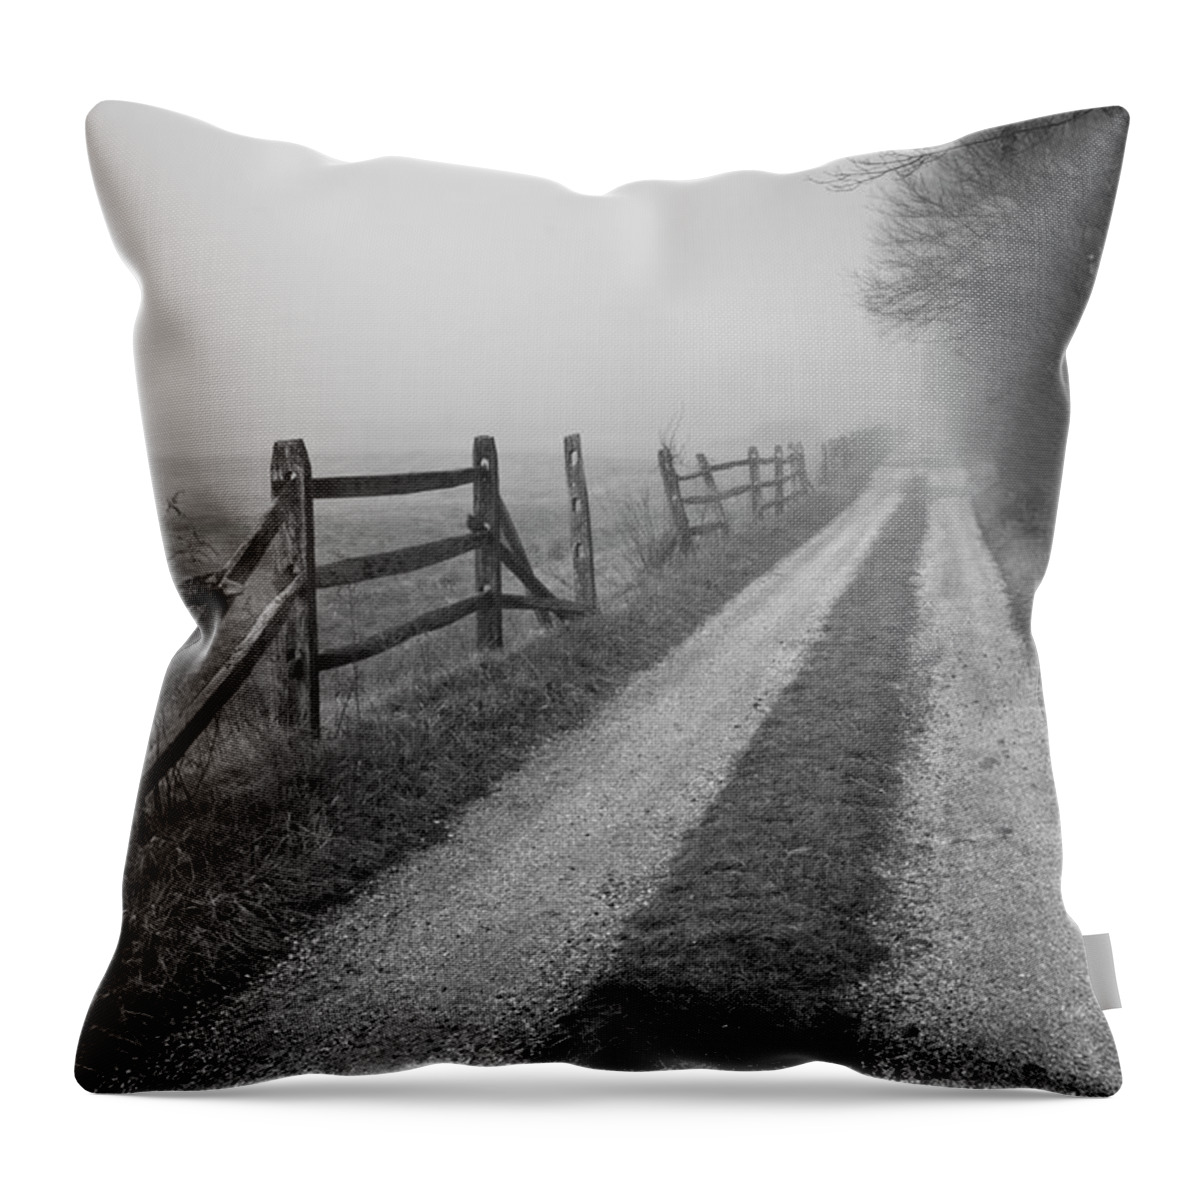 Old Throw Pillow featuring the photograph Old Farm Road by David Gordon